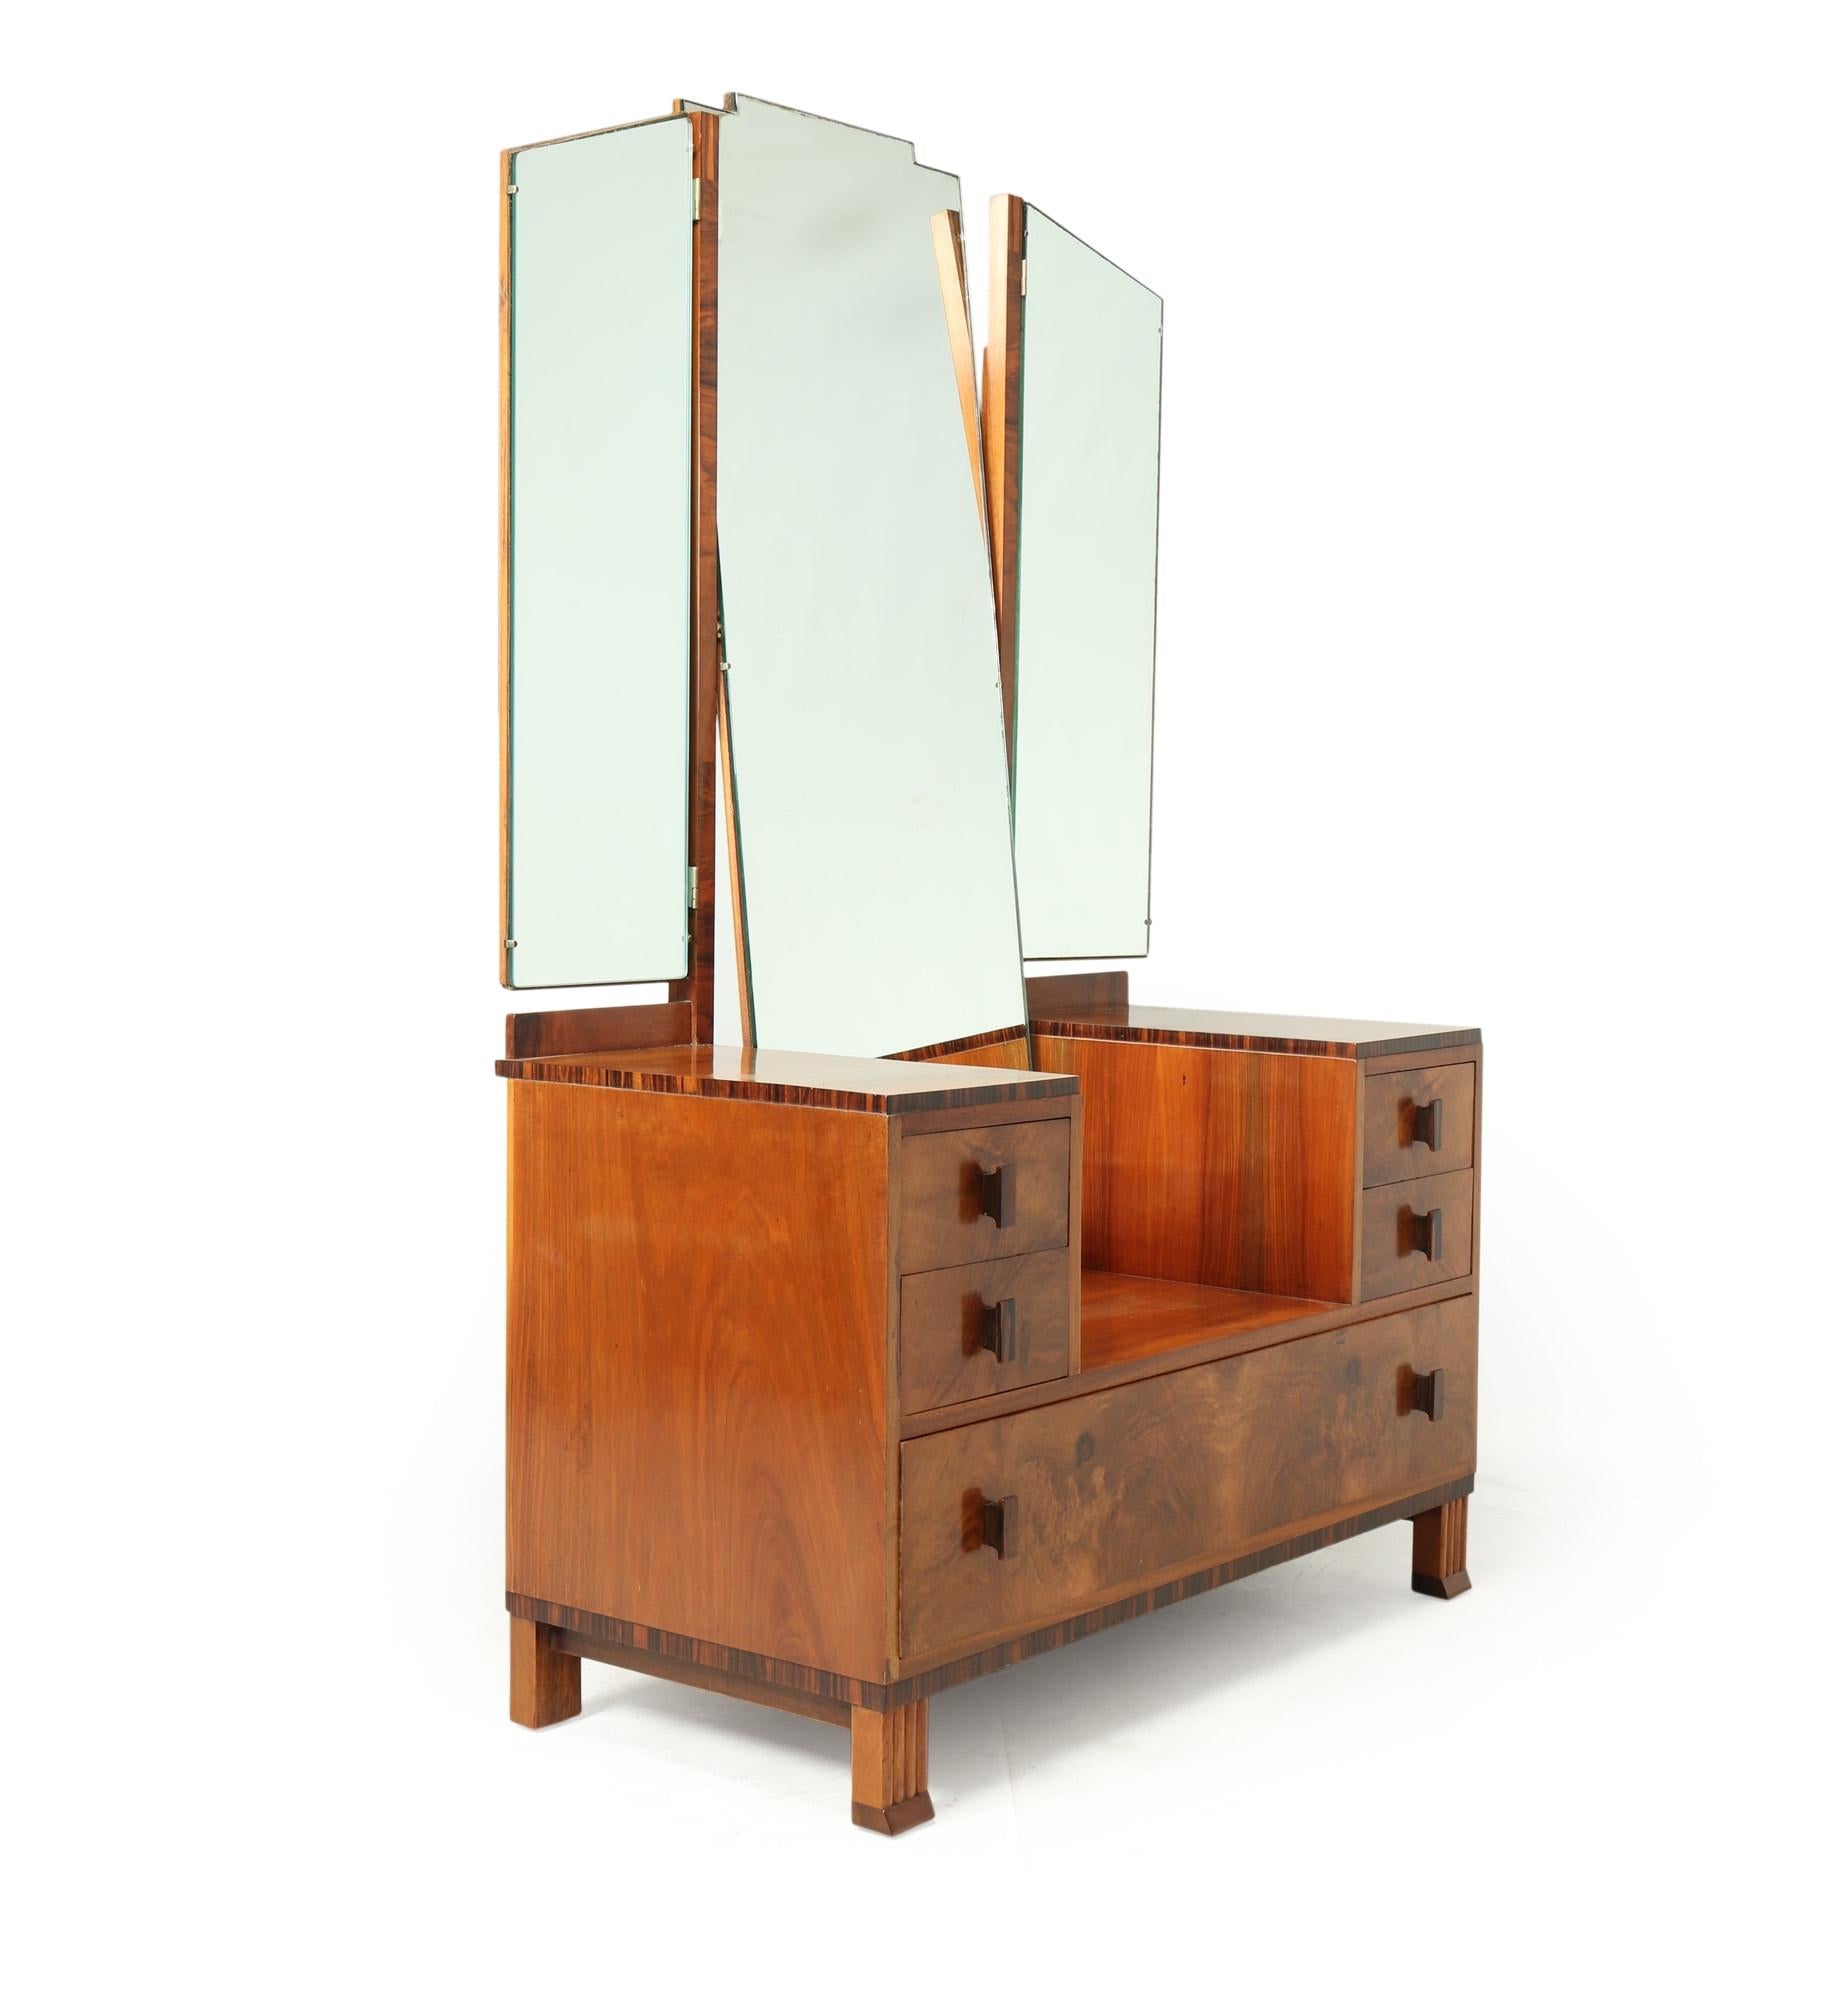 A beautiful dressing table produced in the 1930’s by renowned furniture makers Waring and Gillows. It has one long drawer to the bottom and two smaller drawers each side above all have macassar ebony handles the central mirror tilts back and forward